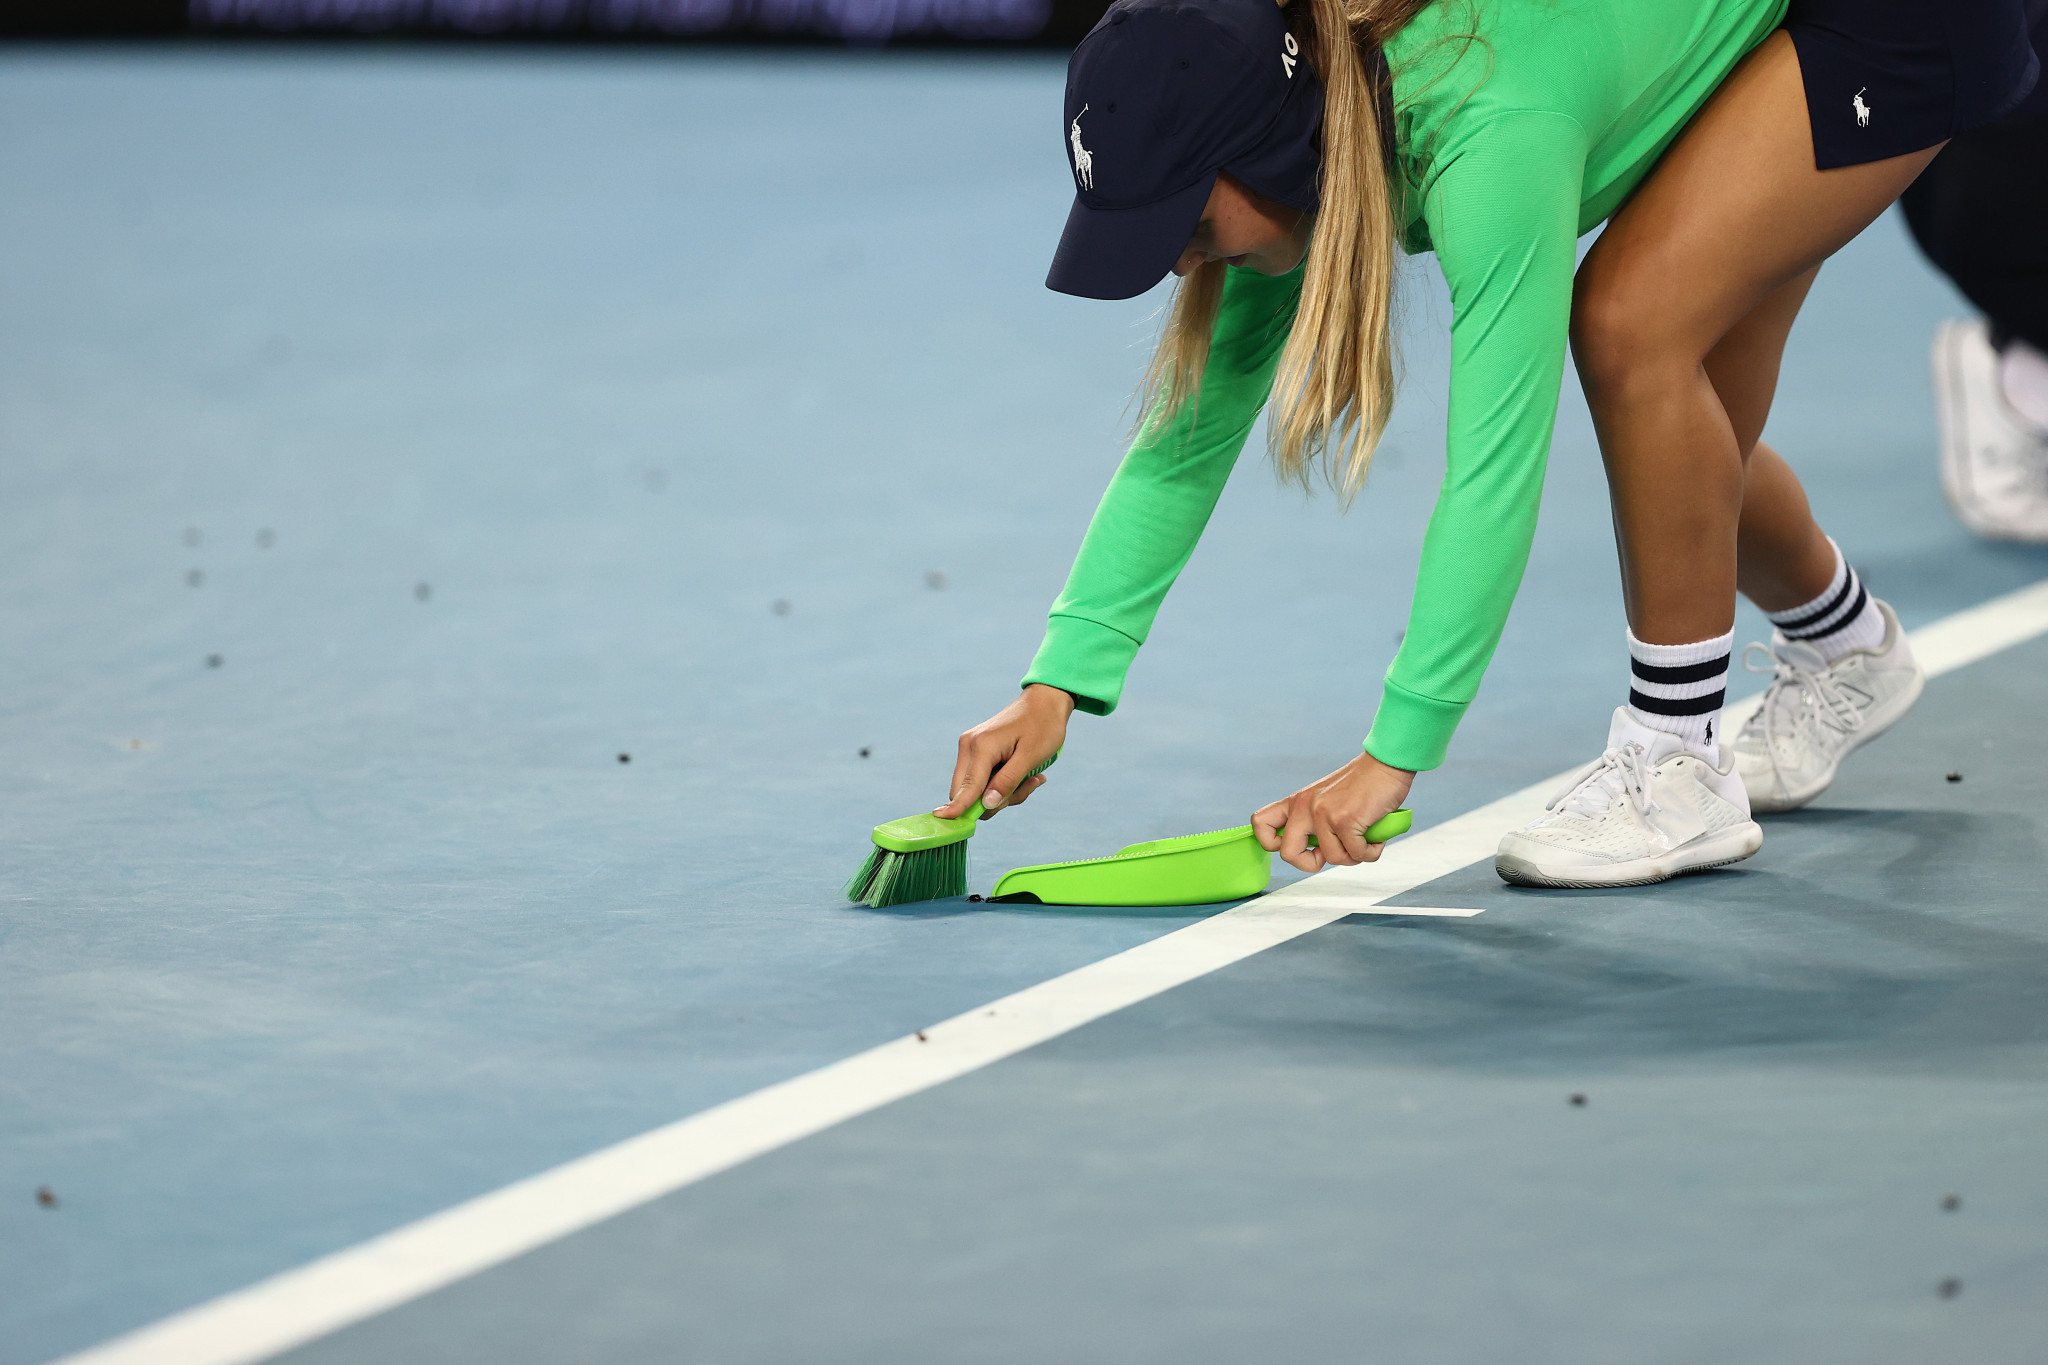 A feature of the night session at Melbourne Park was the presence of insects on court ©Getty Images